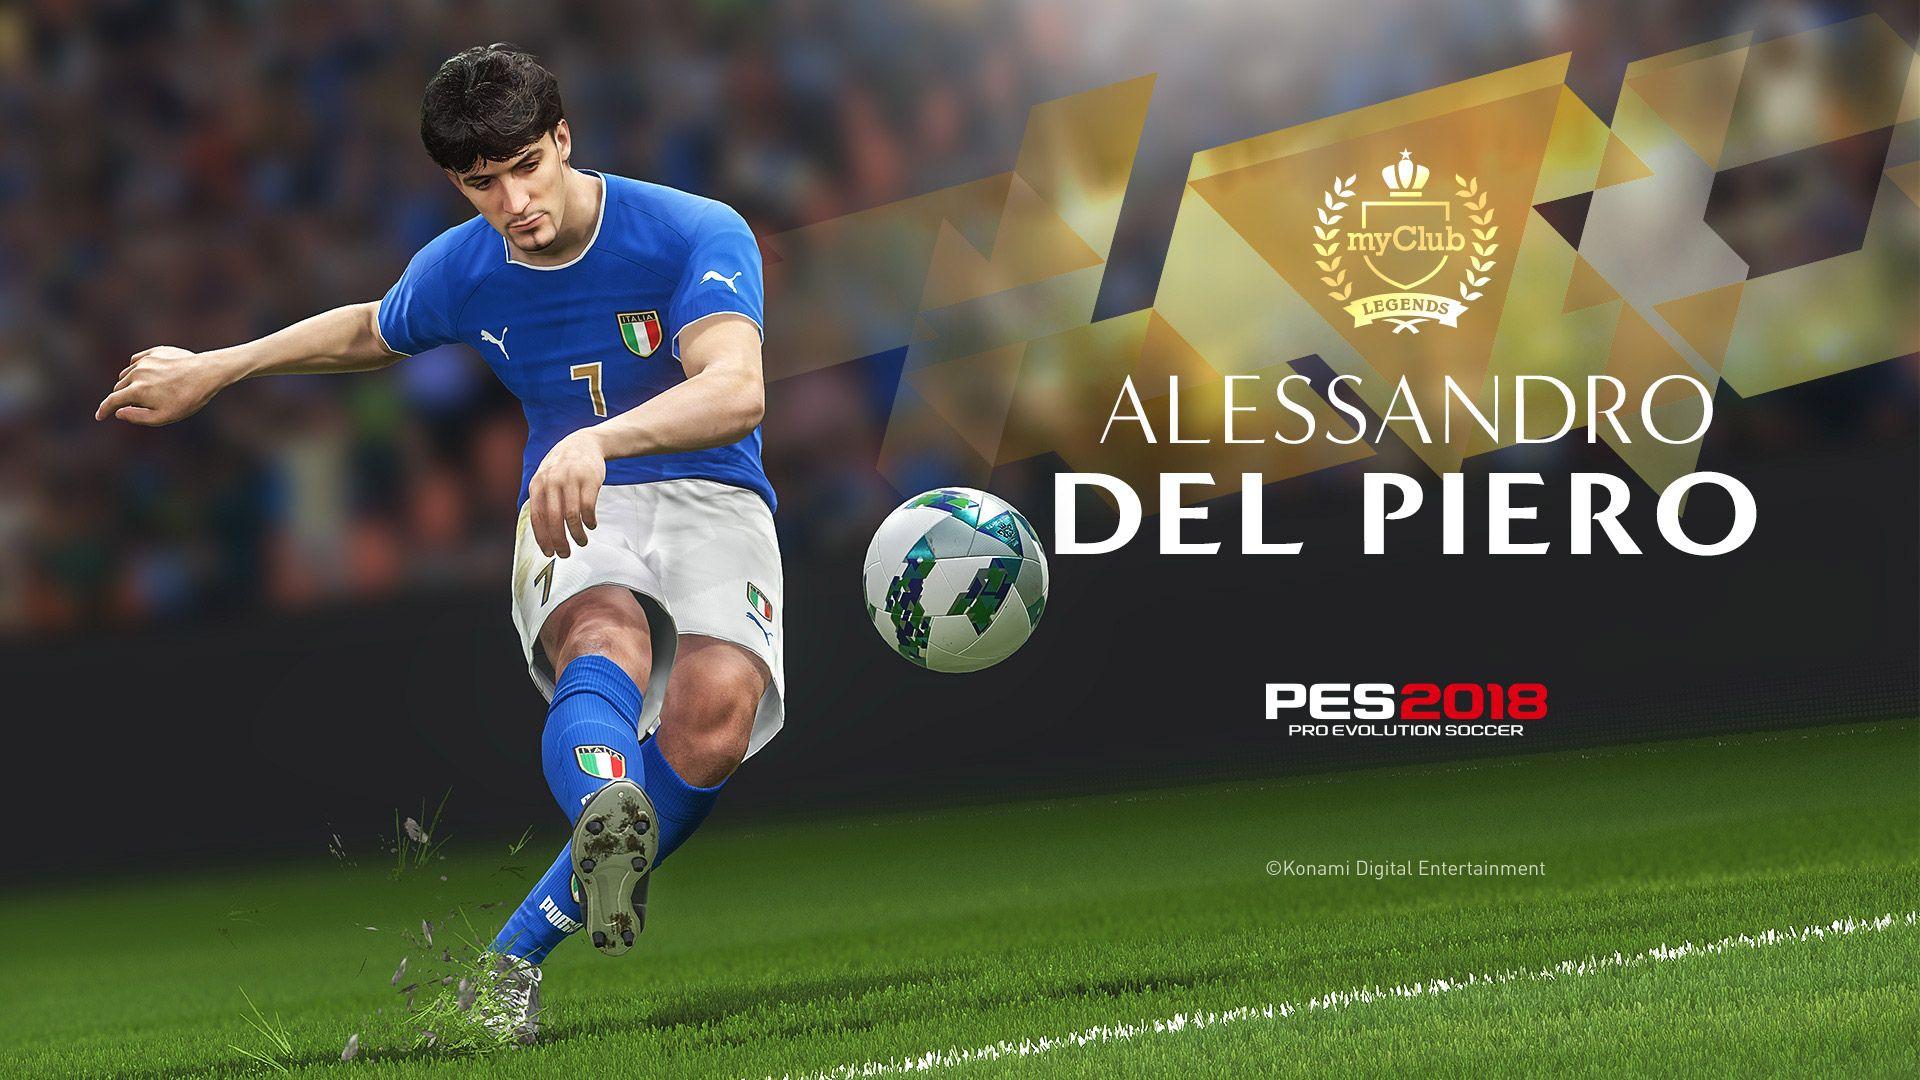 Pavel Nedvěd and Alessandro Del Piero coming to PES!. PES